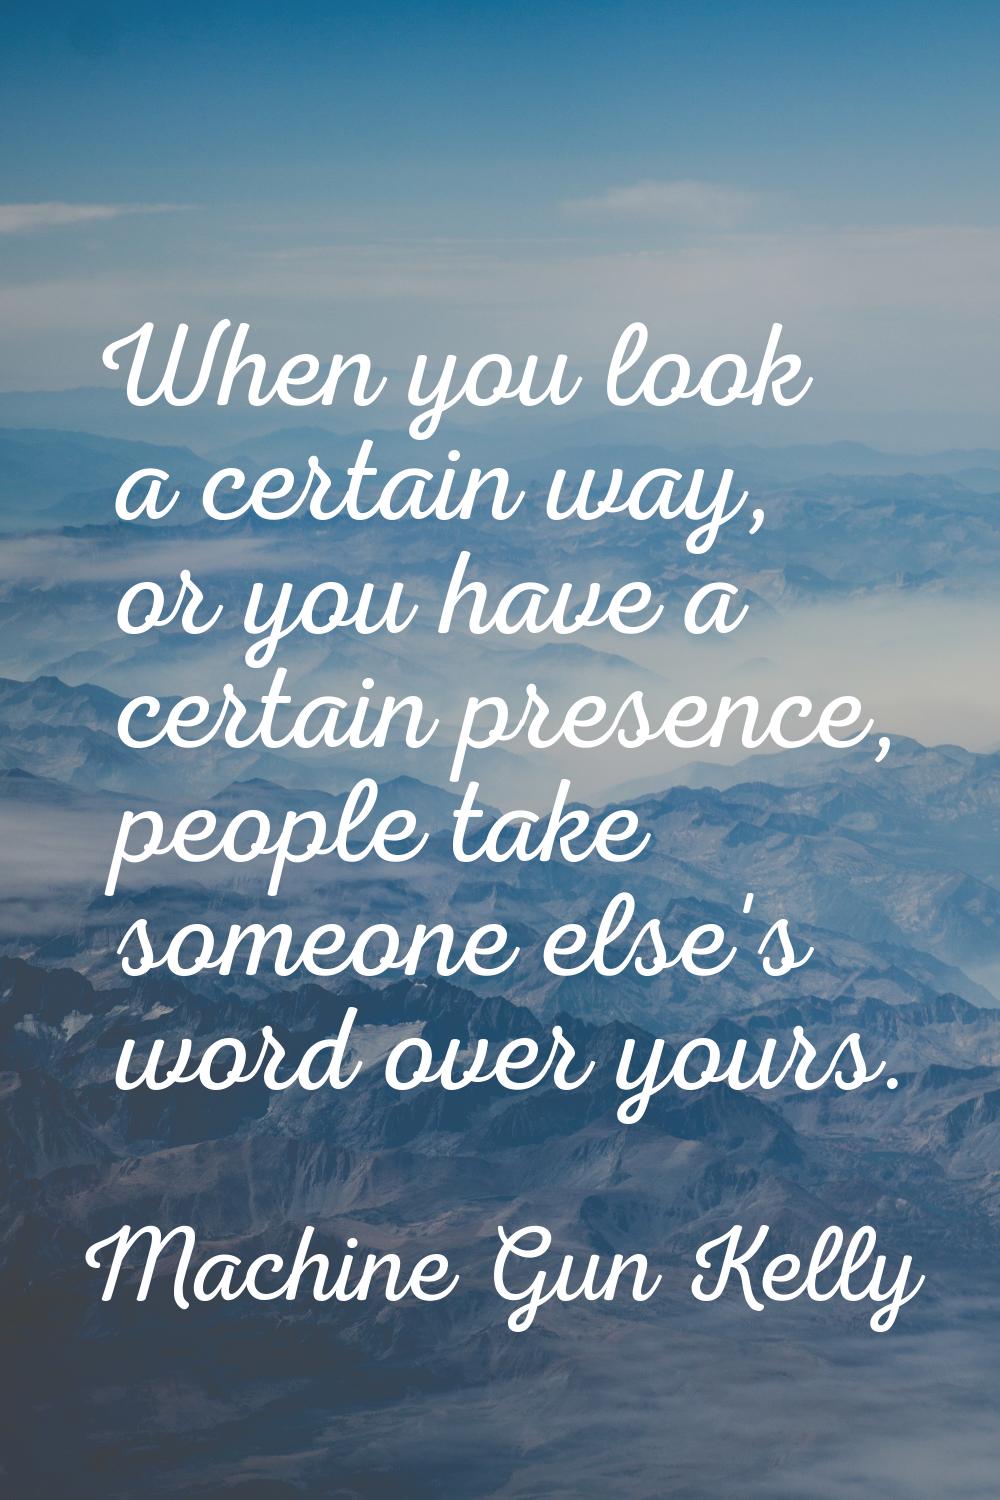 When you look a certain way, or you have a certain presence, people take someone else's word over y